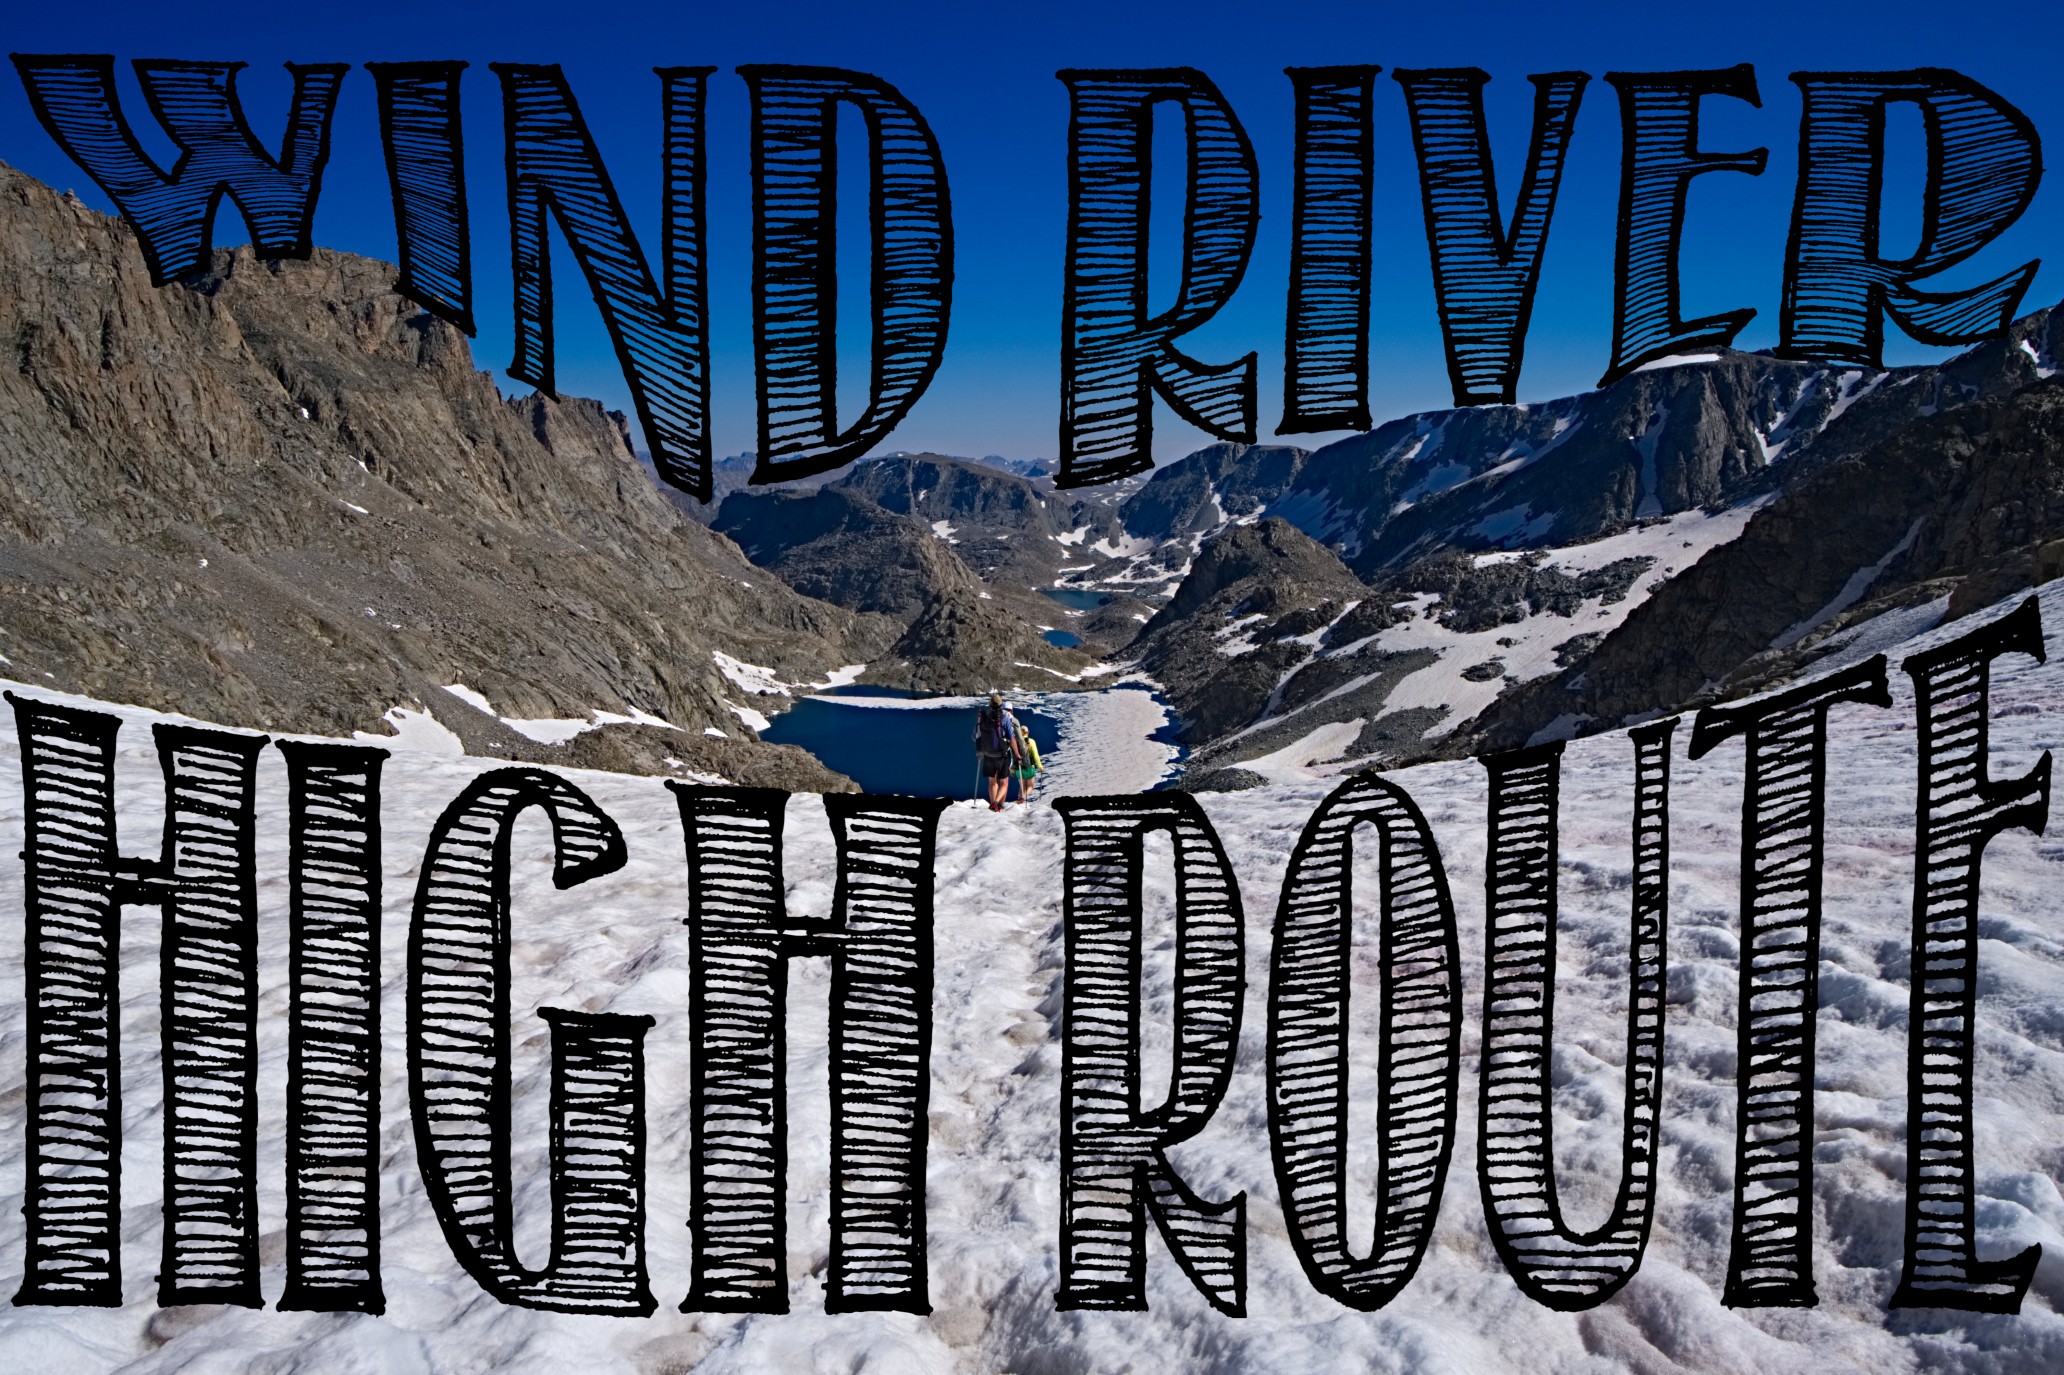 The complete Wind River High Route - Andrew Skurka